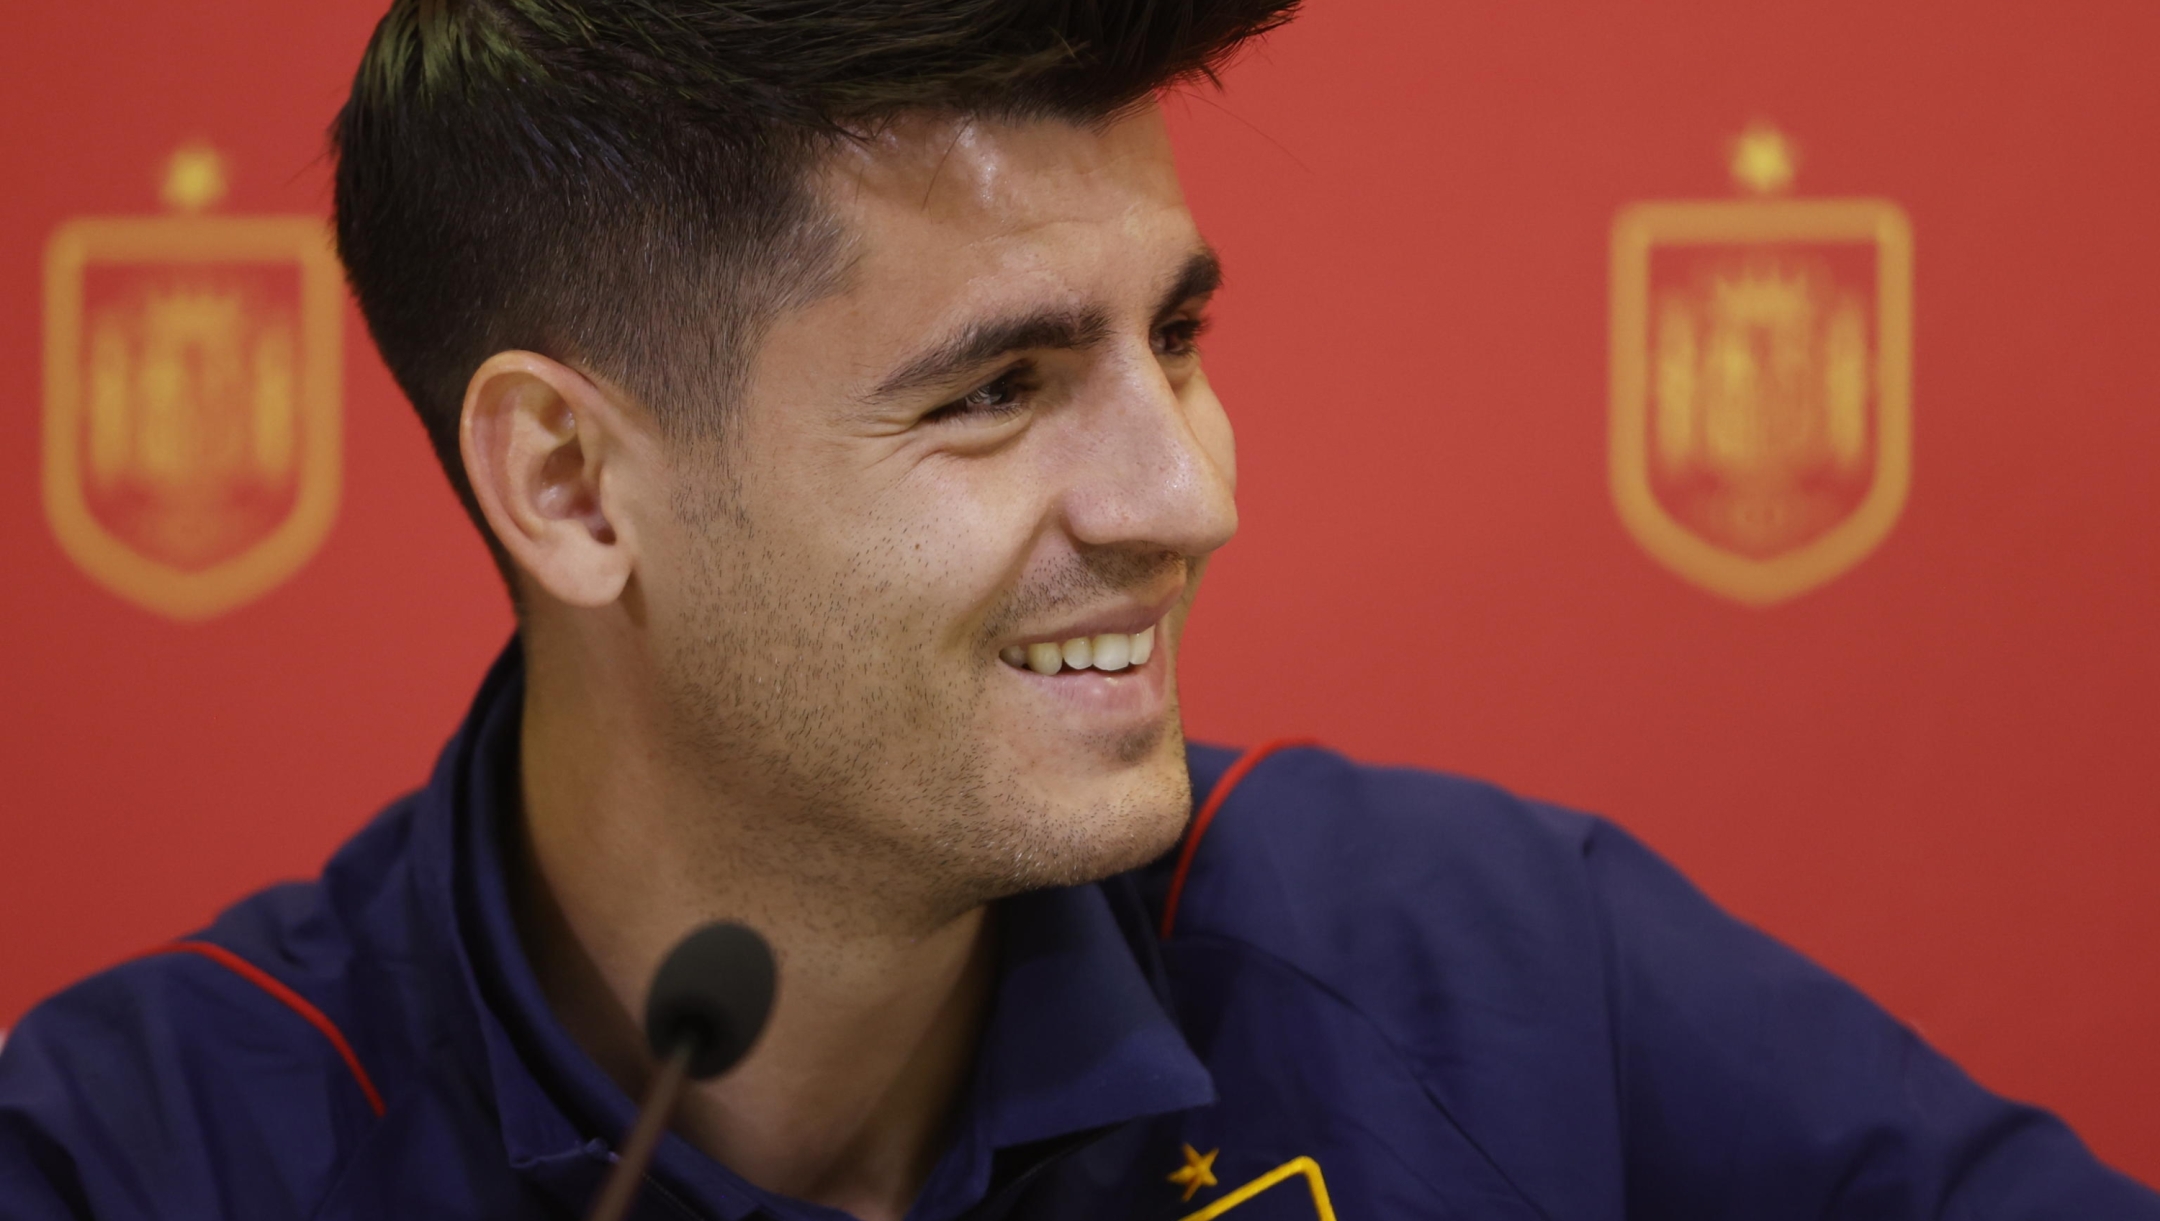 epa10534955 Alvaro Morata, forward of Spain's national soccer team, addresses a press conference in Madrid, Spain, 21 March 2023. Spain will be facing Norway and Scotland in the qualifying matches for the UEFA Euro 2024 on 25 and 28 March respectively.  EPA/MARISCAL